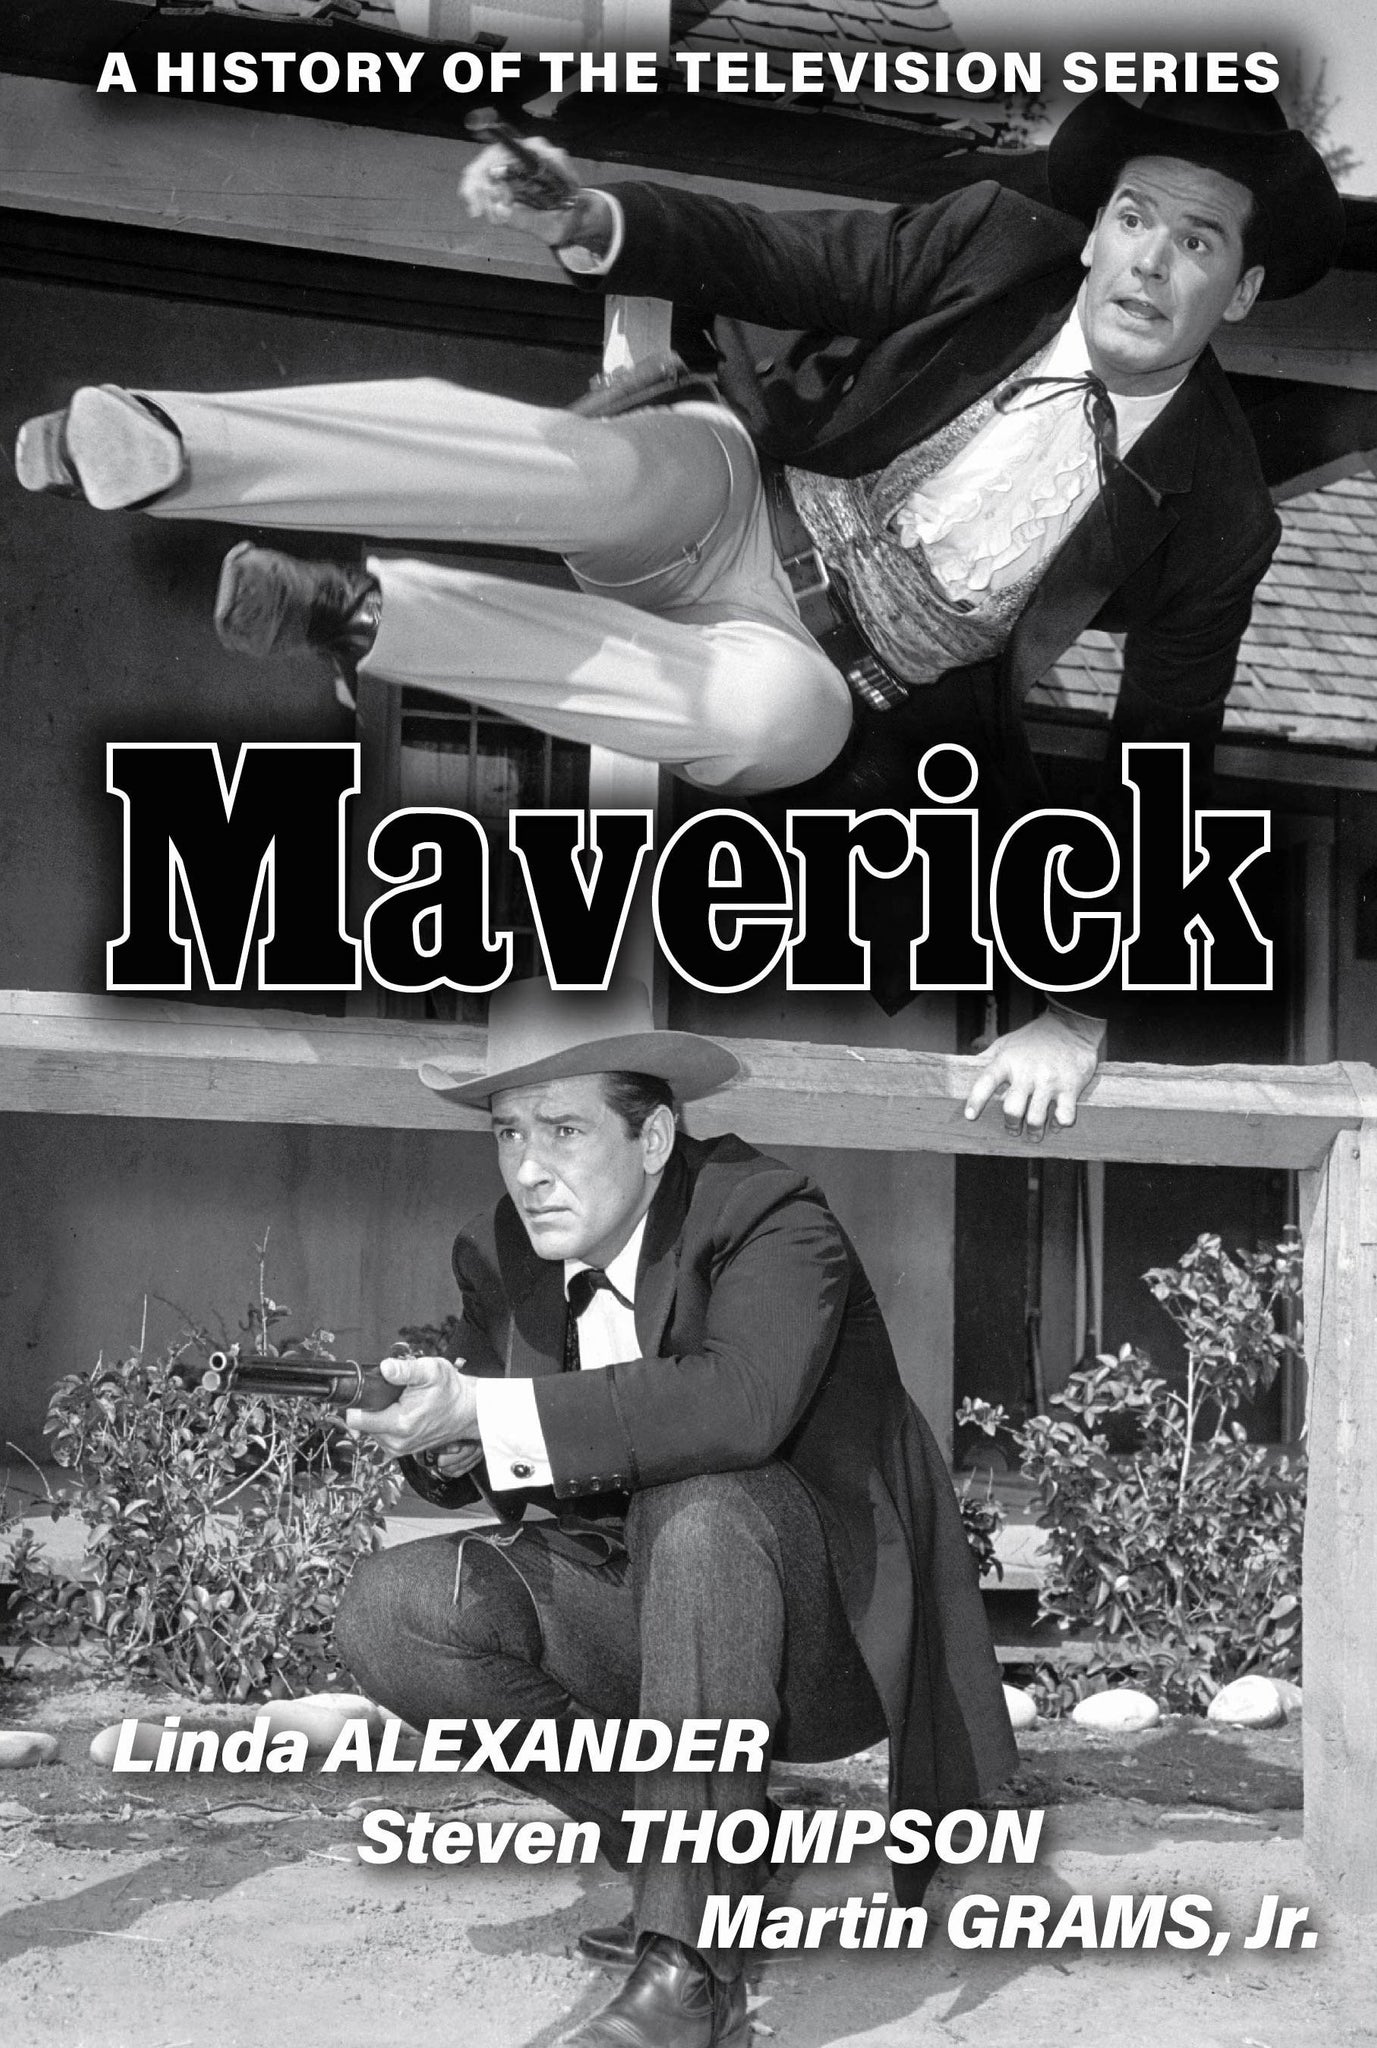 Maverick: A History of the Television Series (paperback)